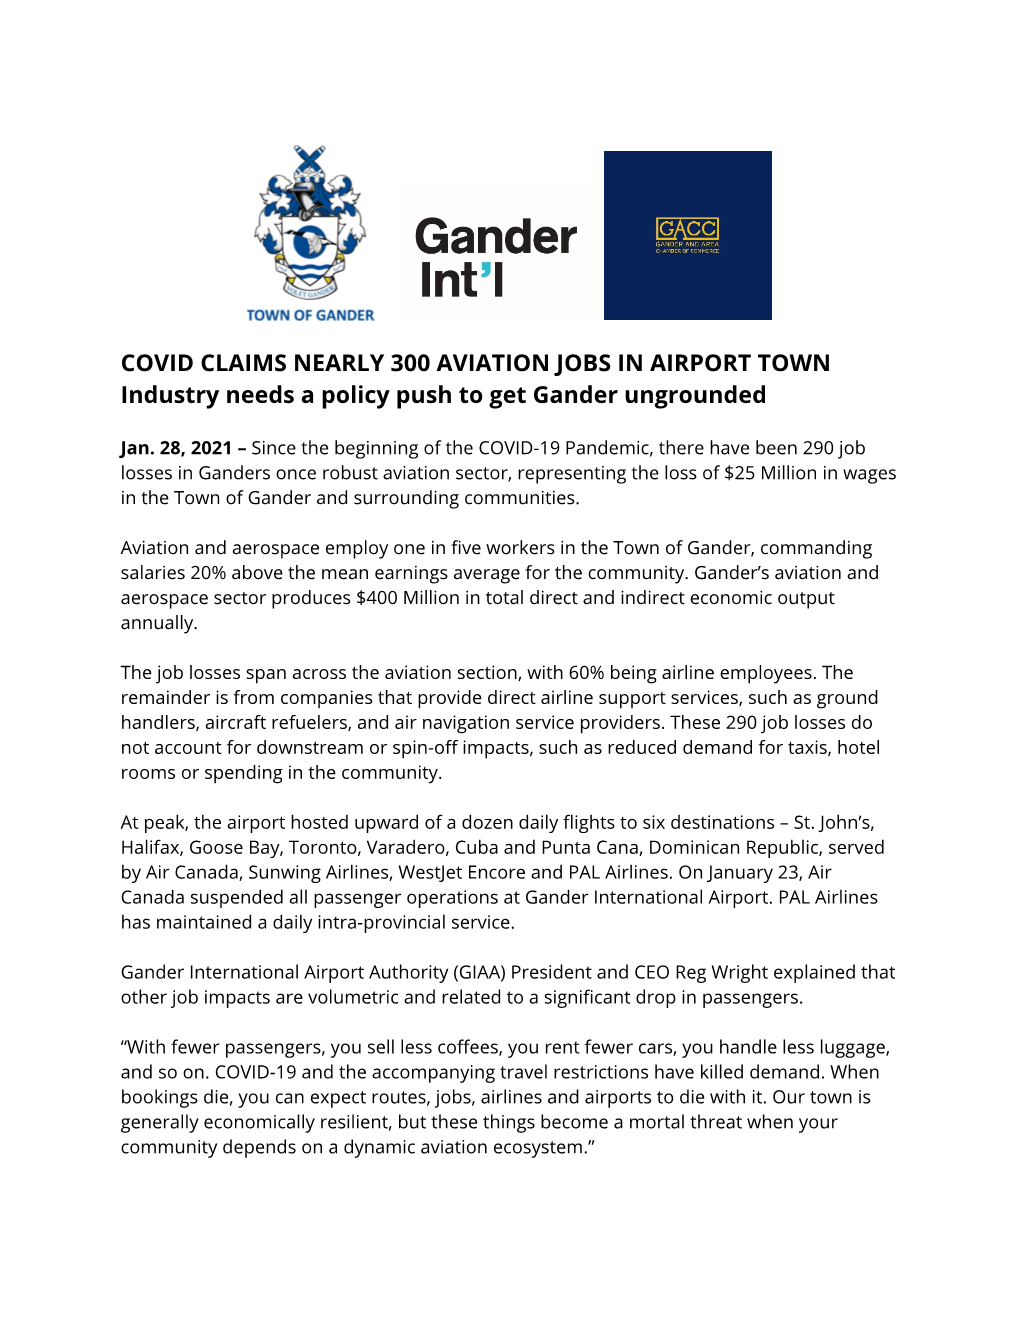 COVID CLAIMS NEARLY 300 AVIATION JOBS in AIRPORT TOWN Industry Needs a Policy Push to Get Gander Ungrounded